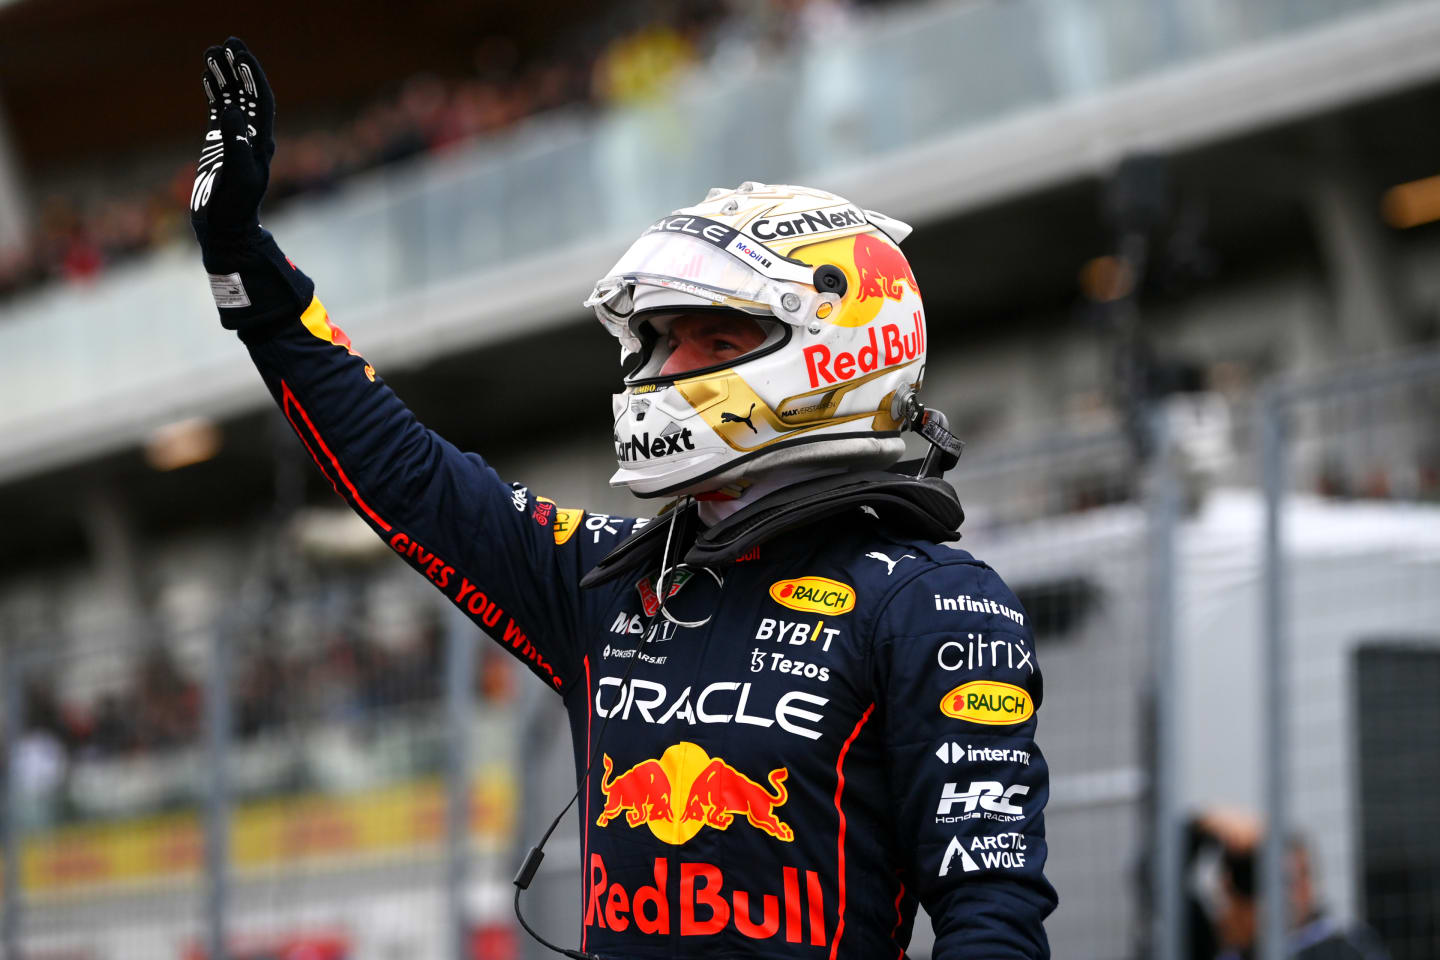 MONTREAL, QUEBEC - JUNE 18: Pole position qualifier Max Verstappen of the Netherlands and Oracle Red Bull Racing celebrates in parc ferme during qualifying ahead of the F1 Grand Prix of Canada at Circuit Gilles Villeneuve on June 18, 2022 in Montreal, Quebec. (Photo by Dan Mullan/Getty Images)